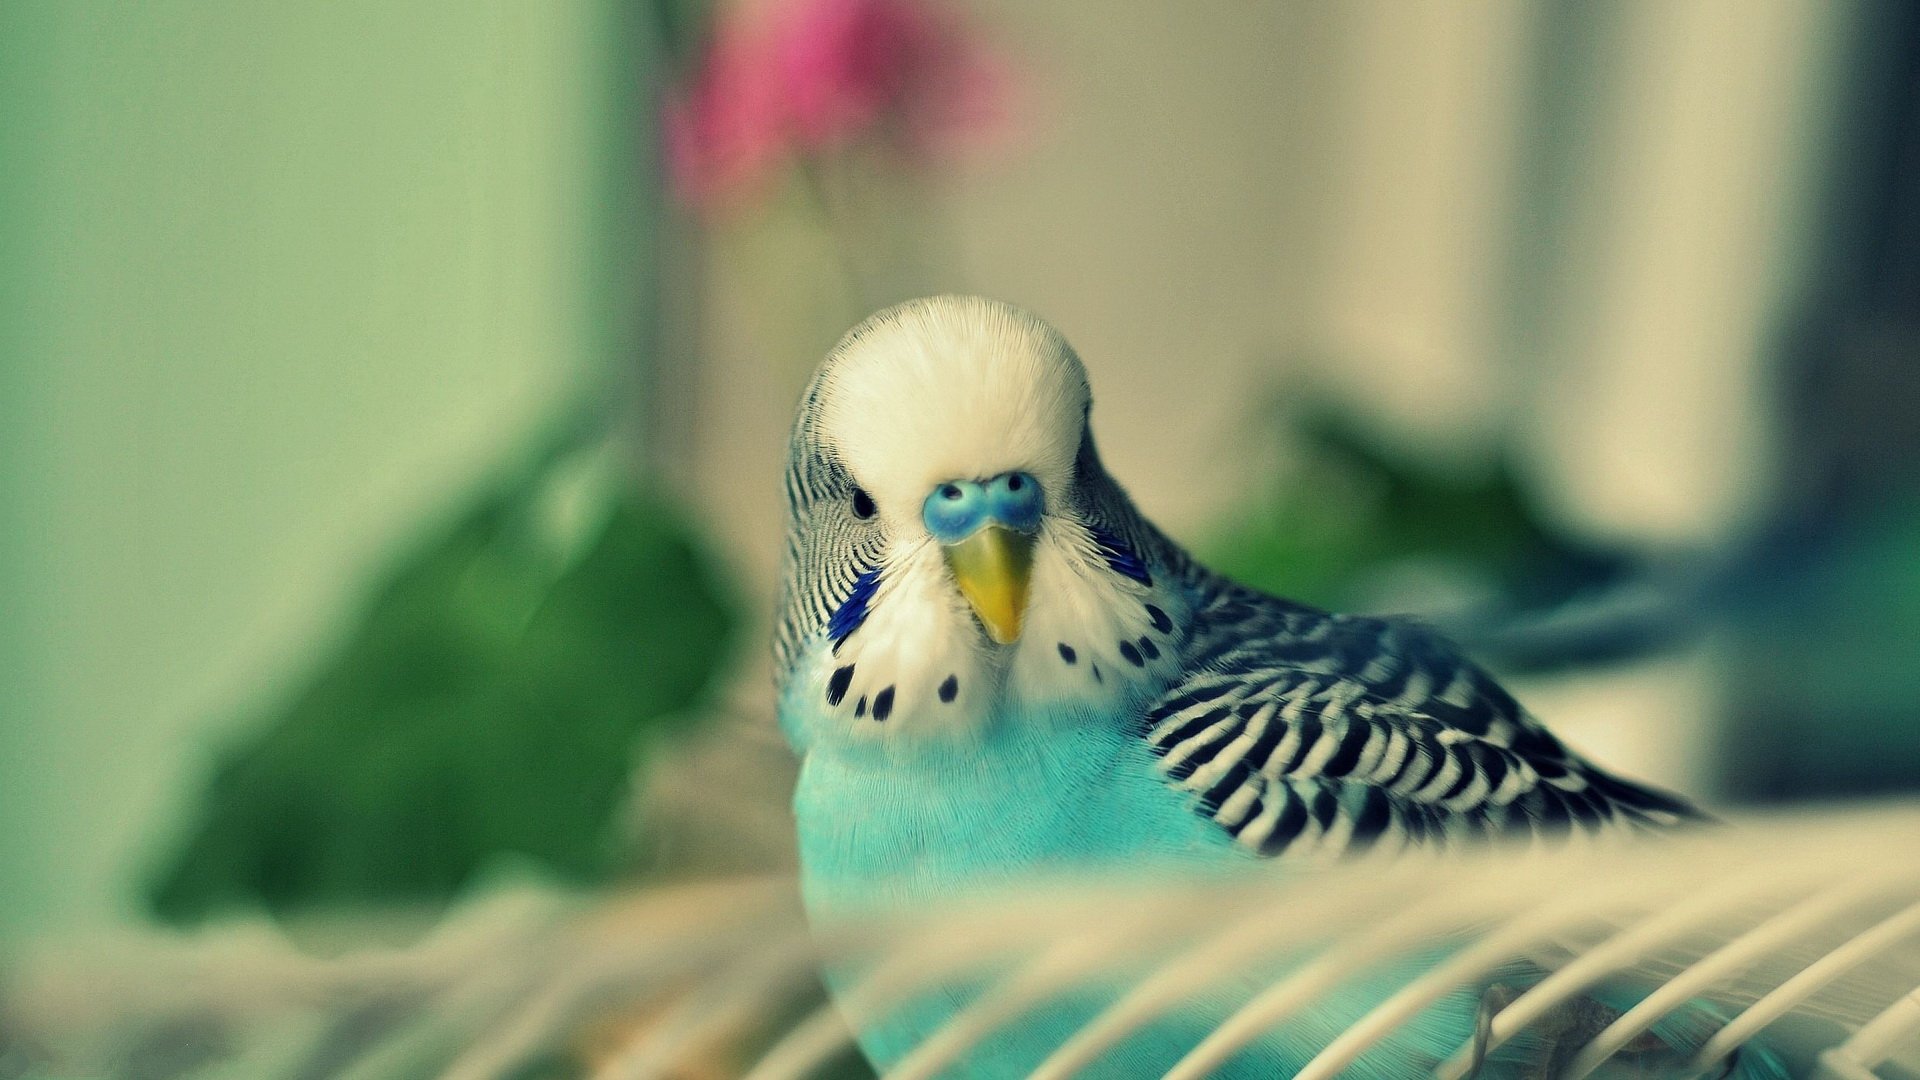 Download hd 1920x1080 Budgerigar PC background ID:32578 for free